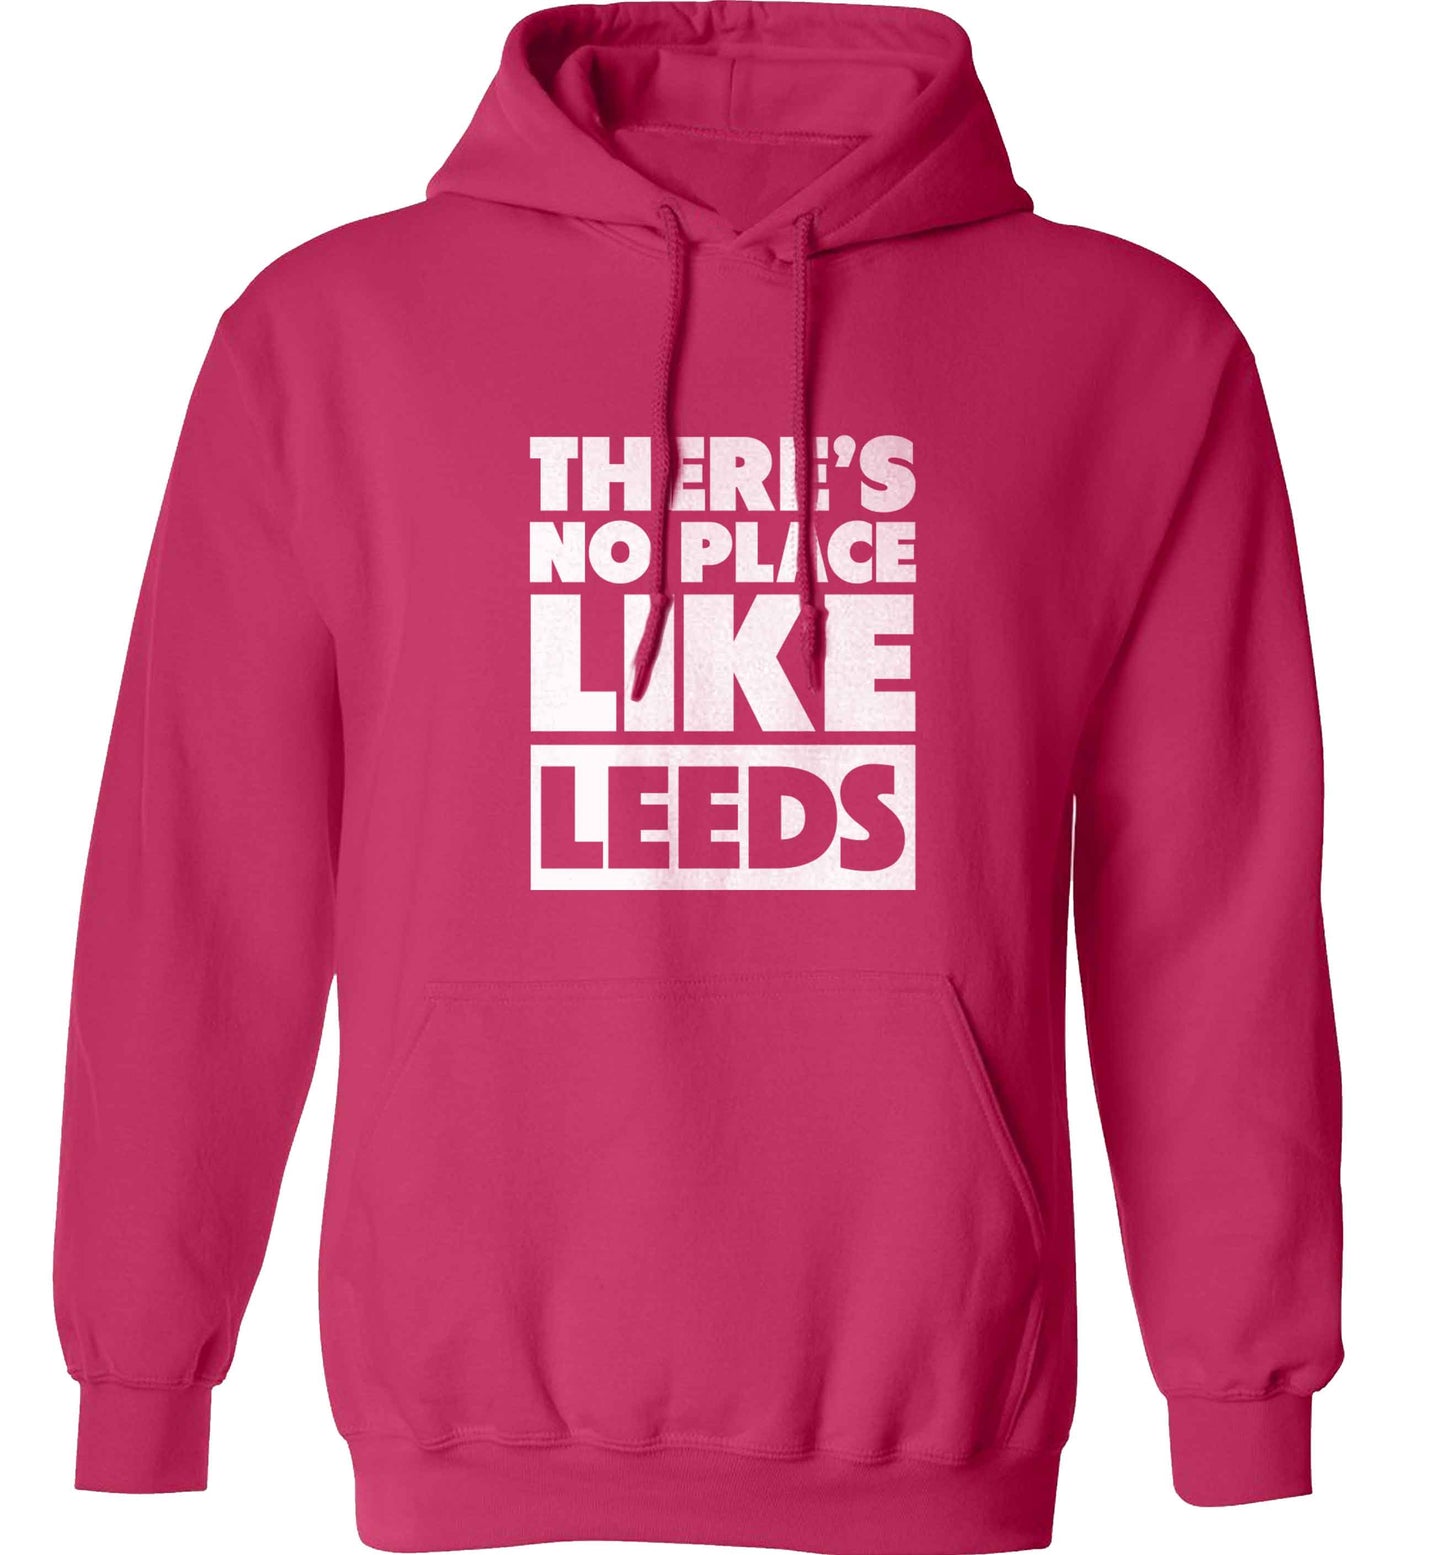 There's no place like Leeds adults unisex pink hoodie 2XL